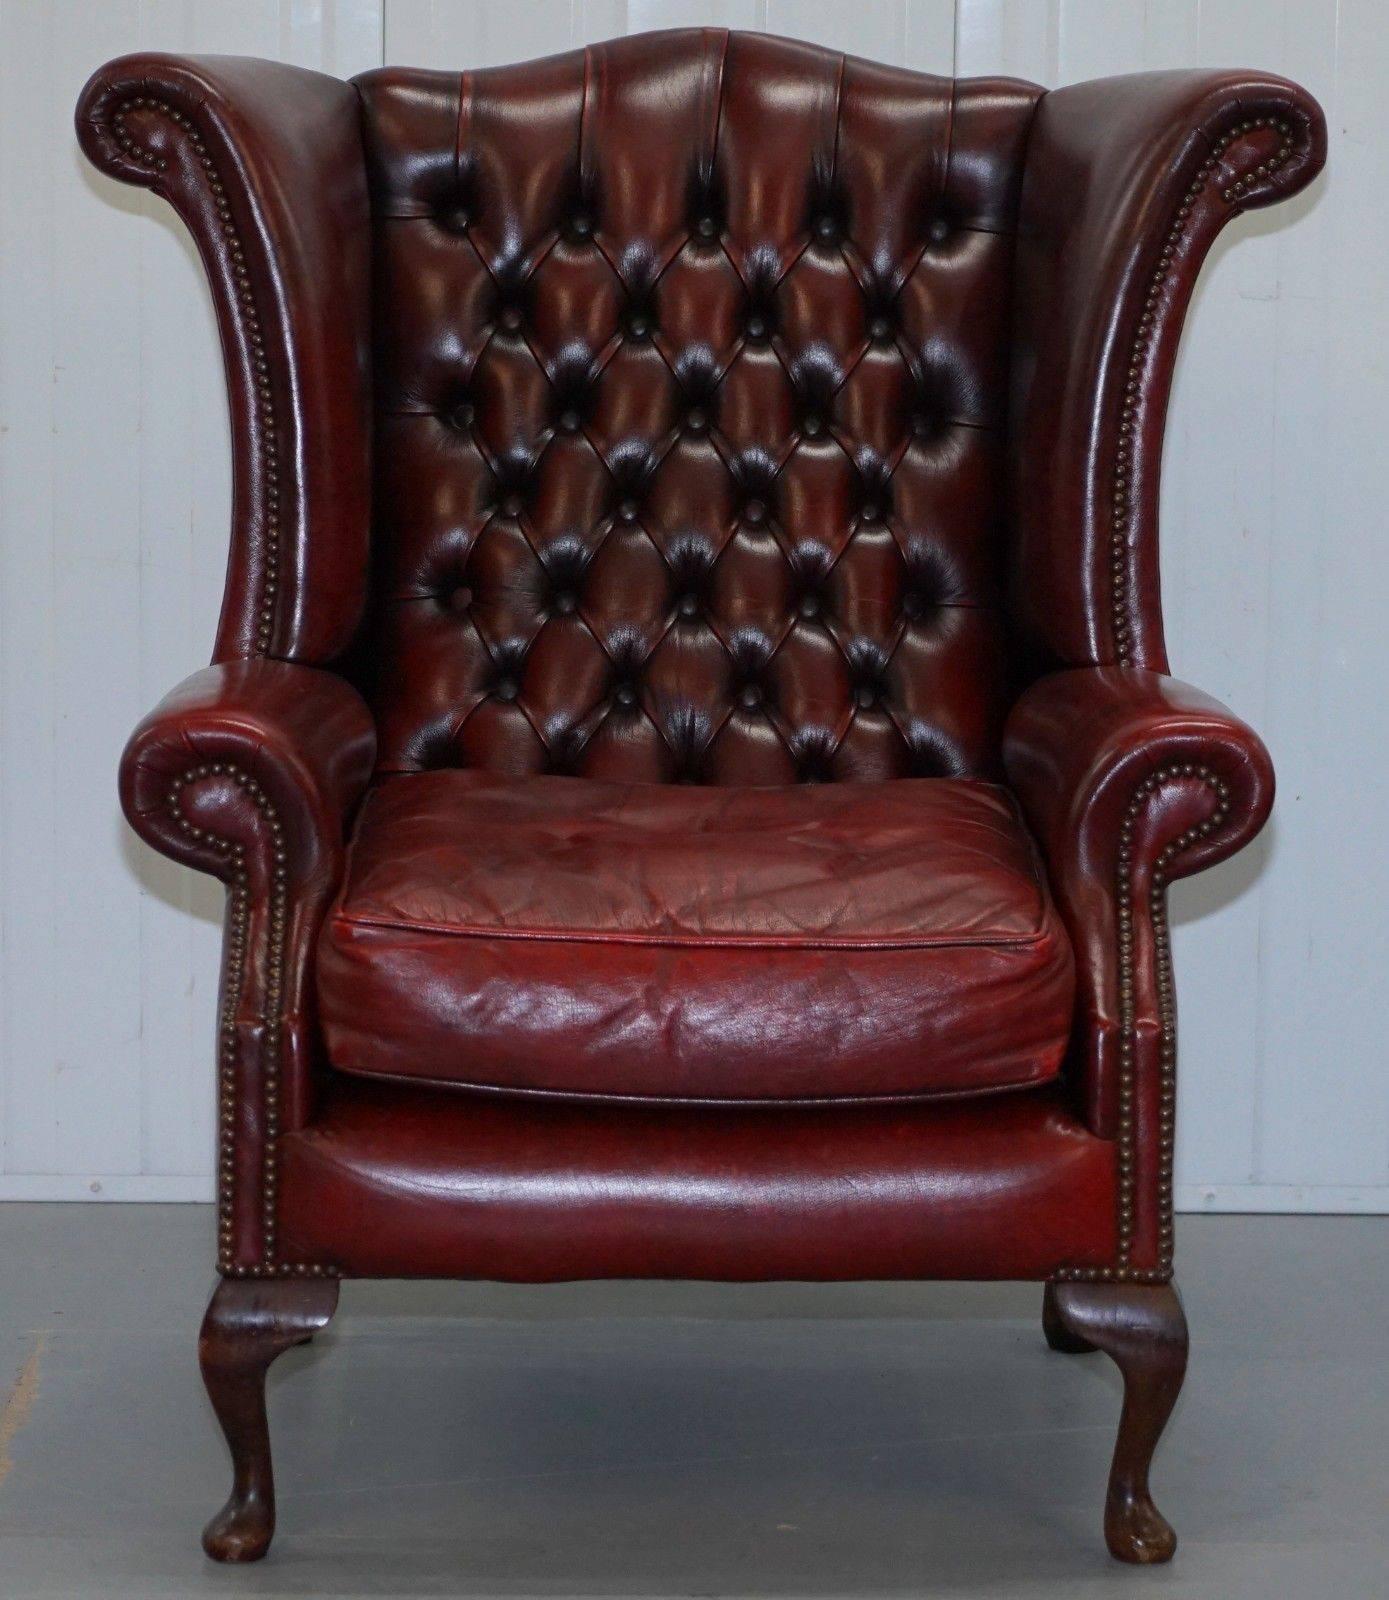 We are delighted to offer for sale this very nice Chesterfield oxblood leather wingback armchair with claw and ball feet

A very good looking and well-made armchair in lightly restored very good condition throughout, we have deep cleaned hand